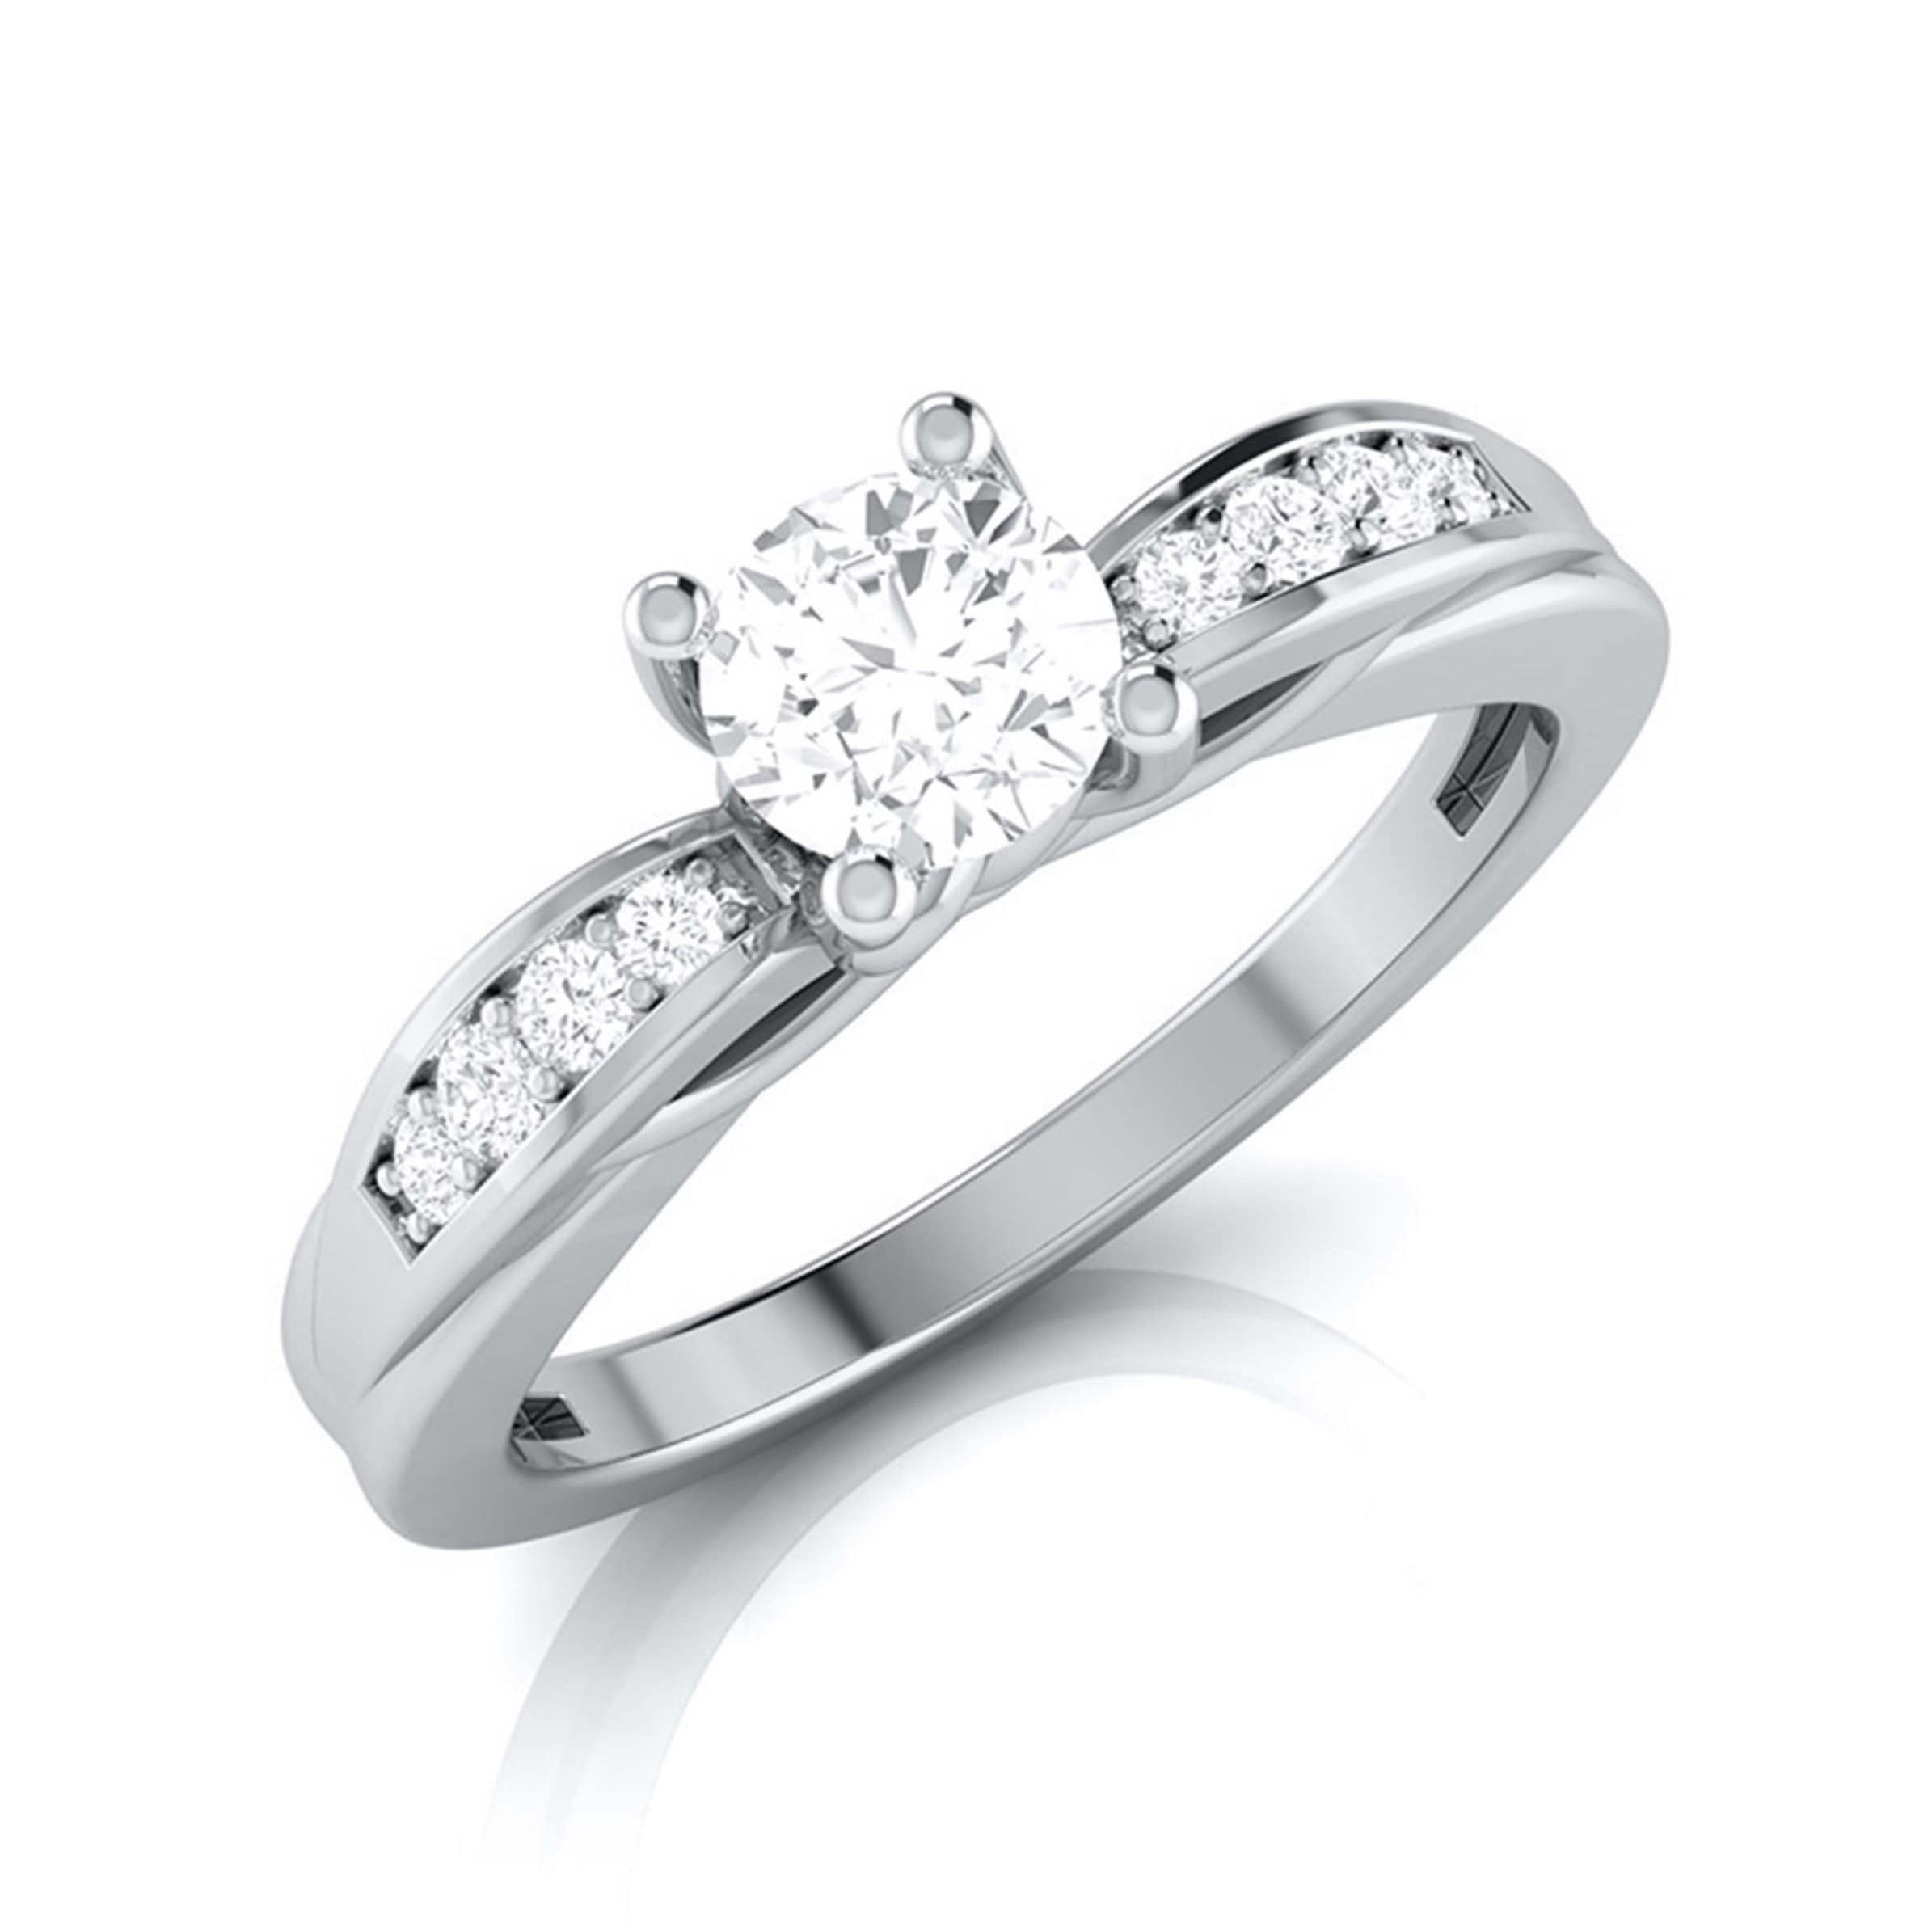 Designer engagement rings for a classic, contemporary look | The Jewellery  Editor